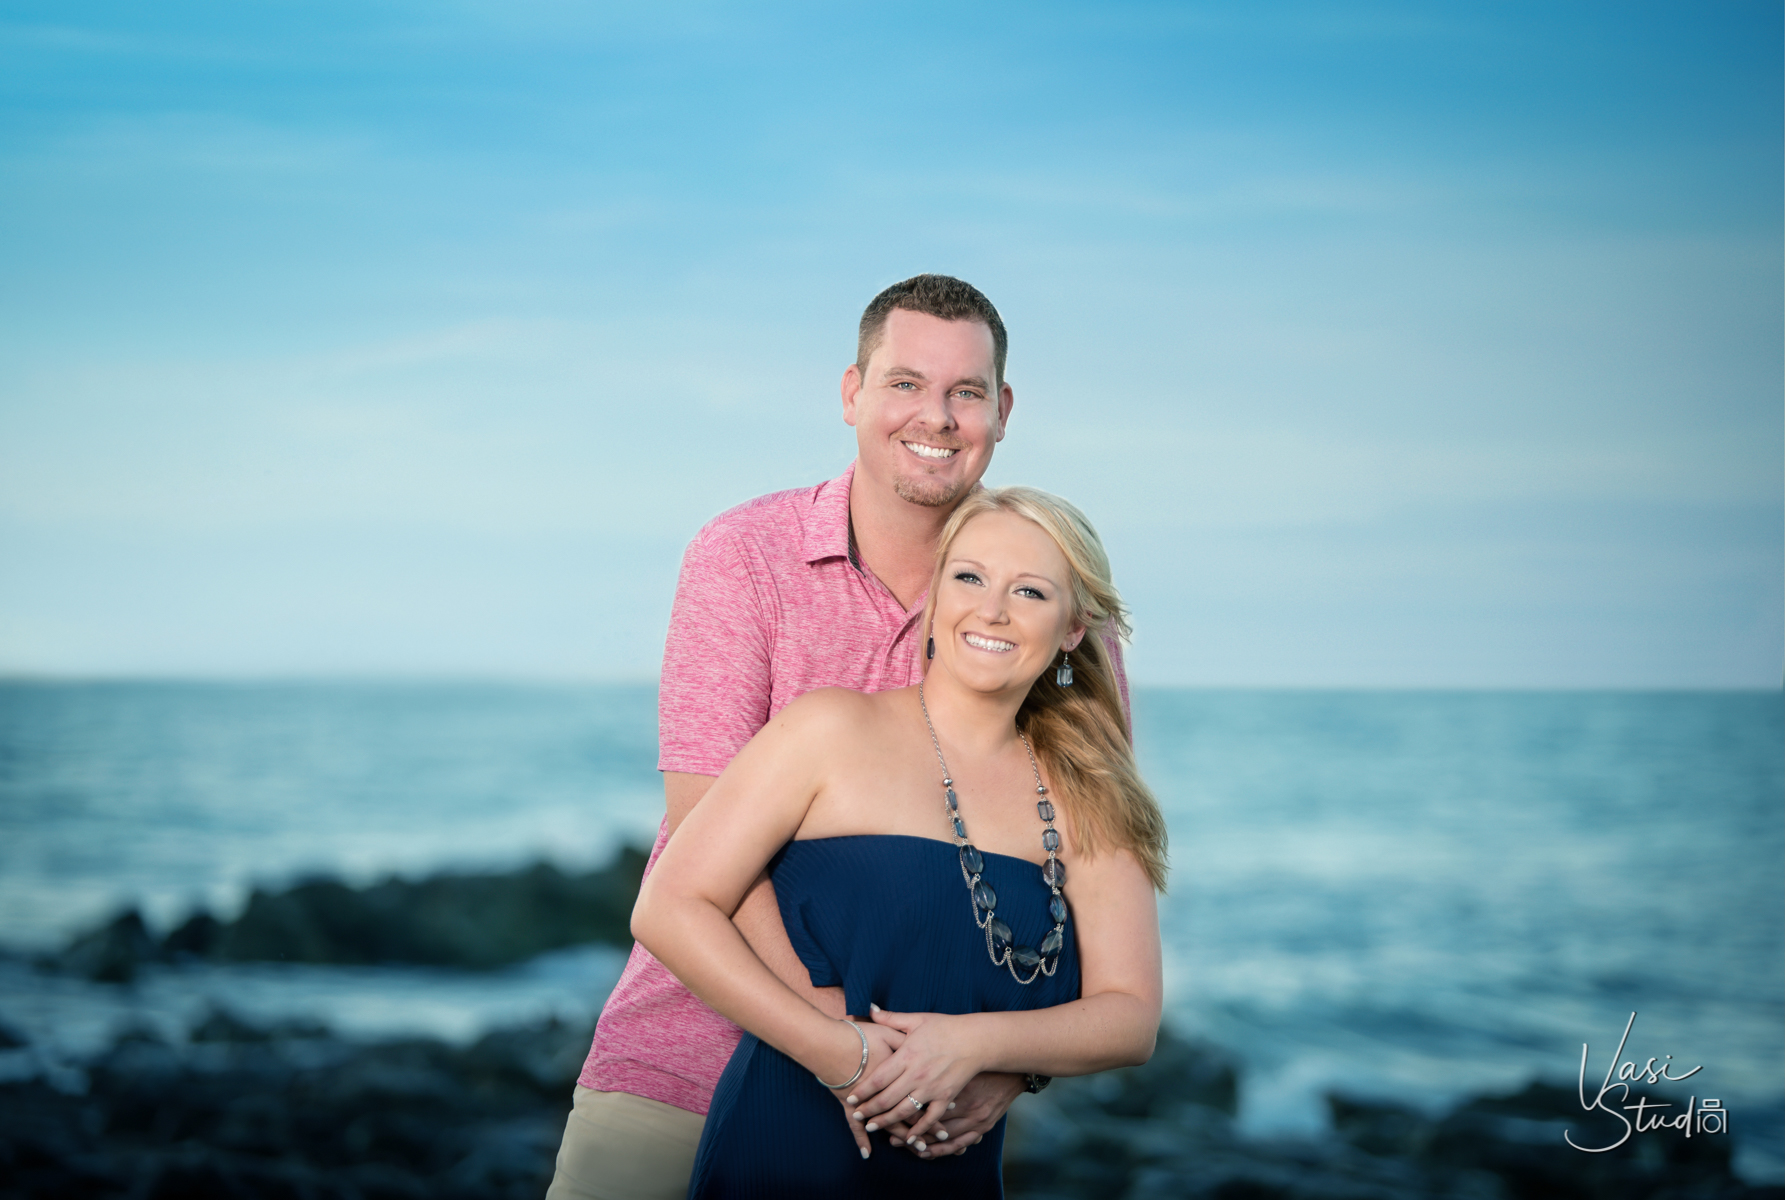 Destination engagement photos in South Florida. Call us today at 561.307.9875 to reserve your session.